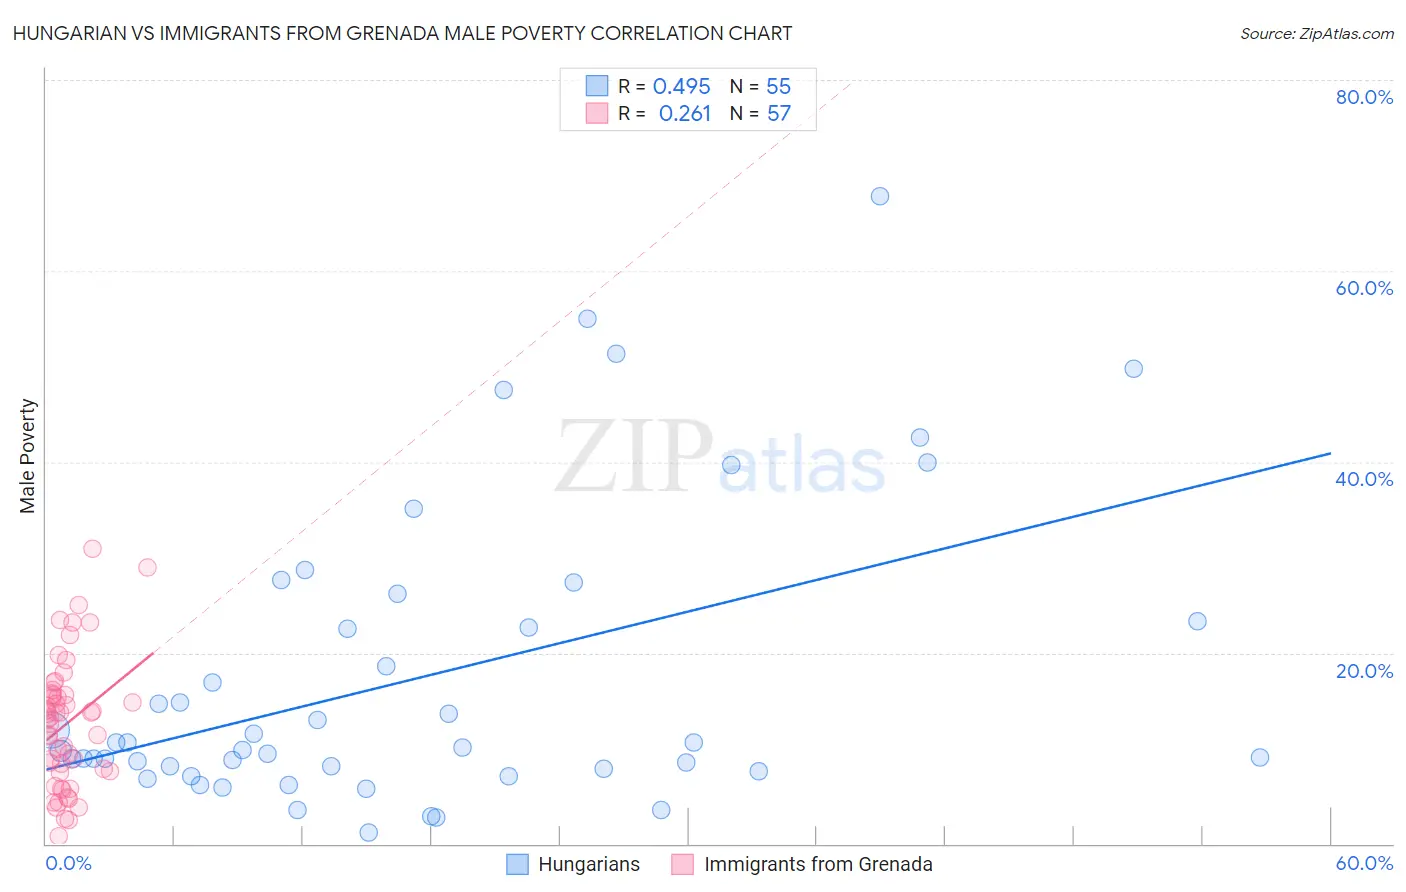 Hungarian vs Immigrants from Grenada Male Poverty